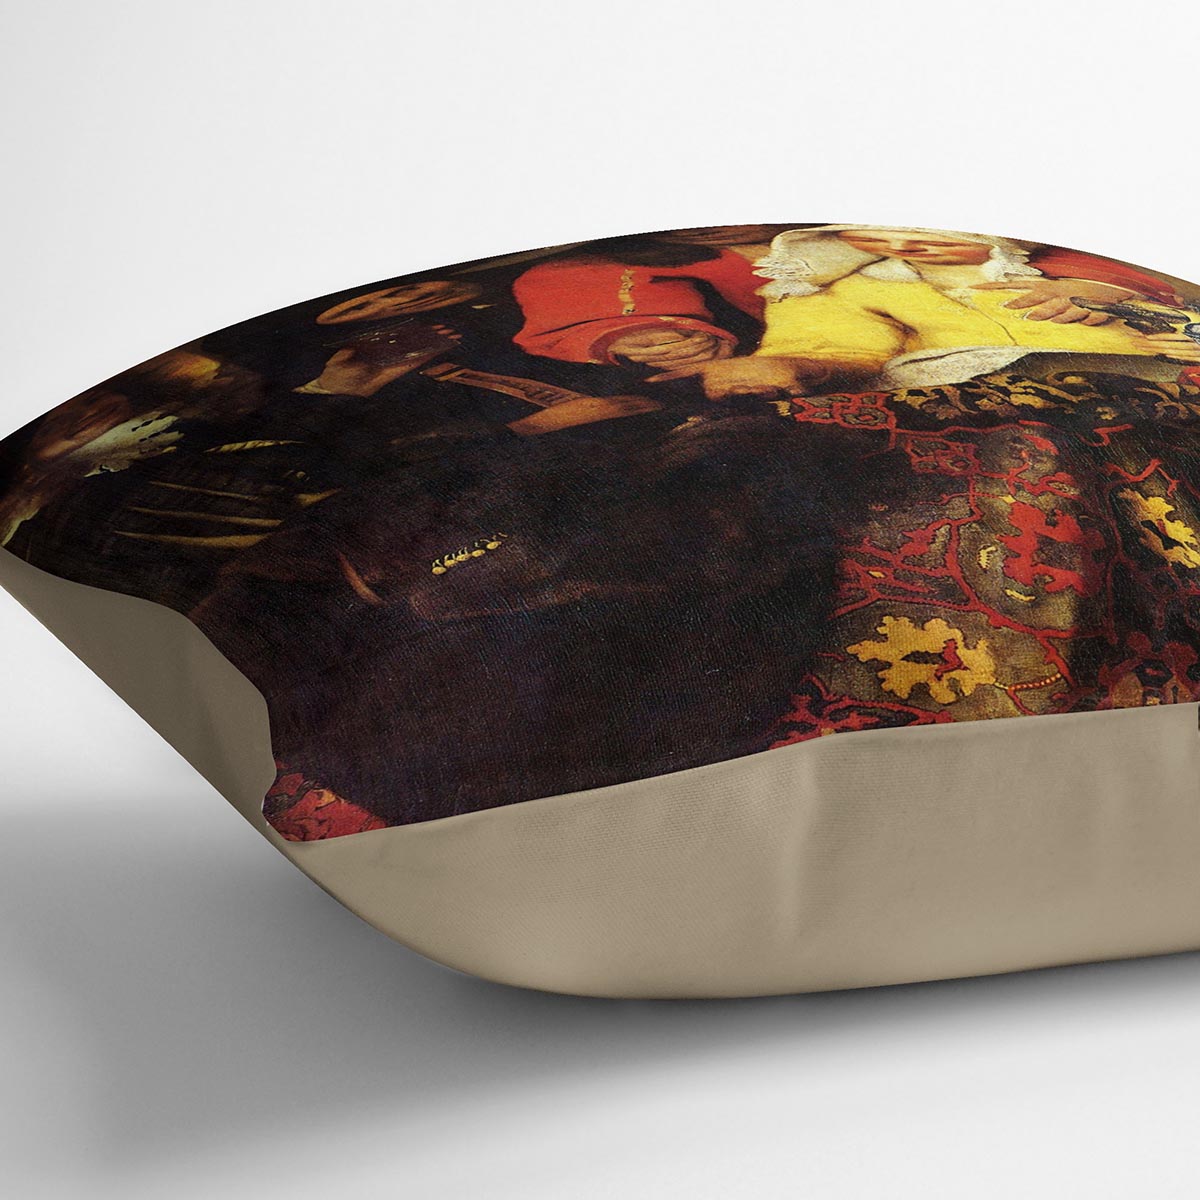 The Procuress by Vermeer Cushion